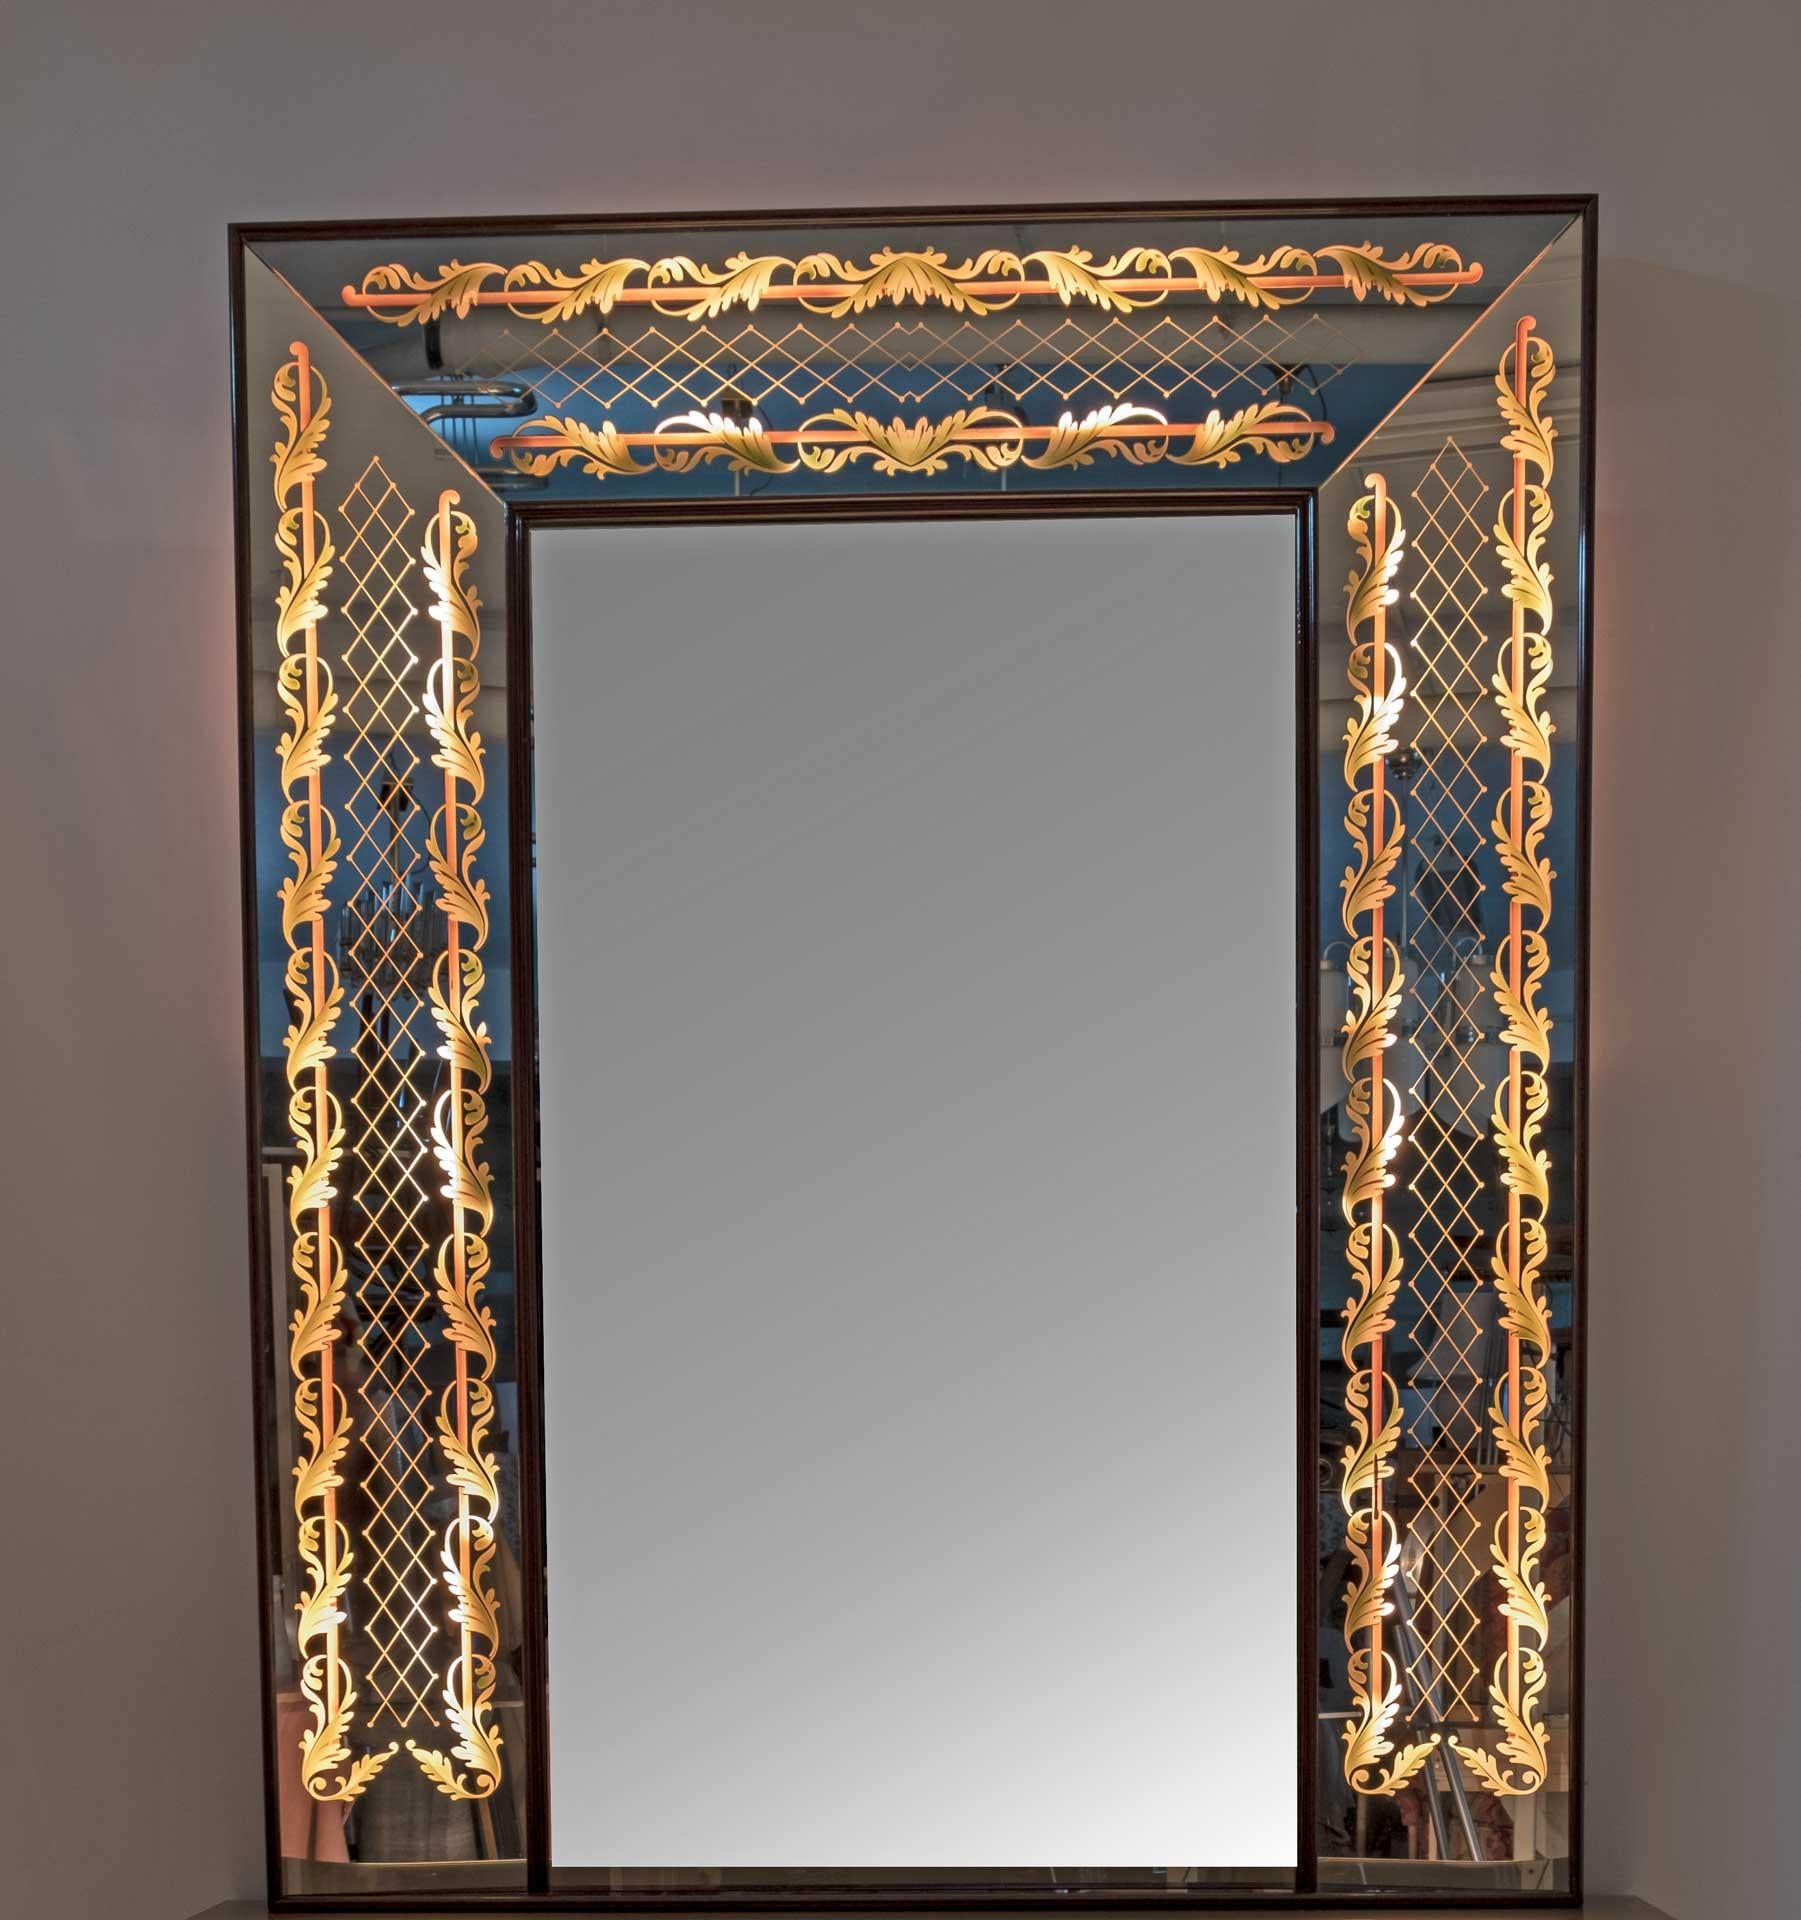 Large Italian Mid-Century Modern Decorative mirror by Luigi Brusotti, 1940s
Mirror, backlit along the perimeter, corresponding to the yellow and green decorative motifs drawn on the front. Structure in solid wood.
Probable Fontana Arte production.